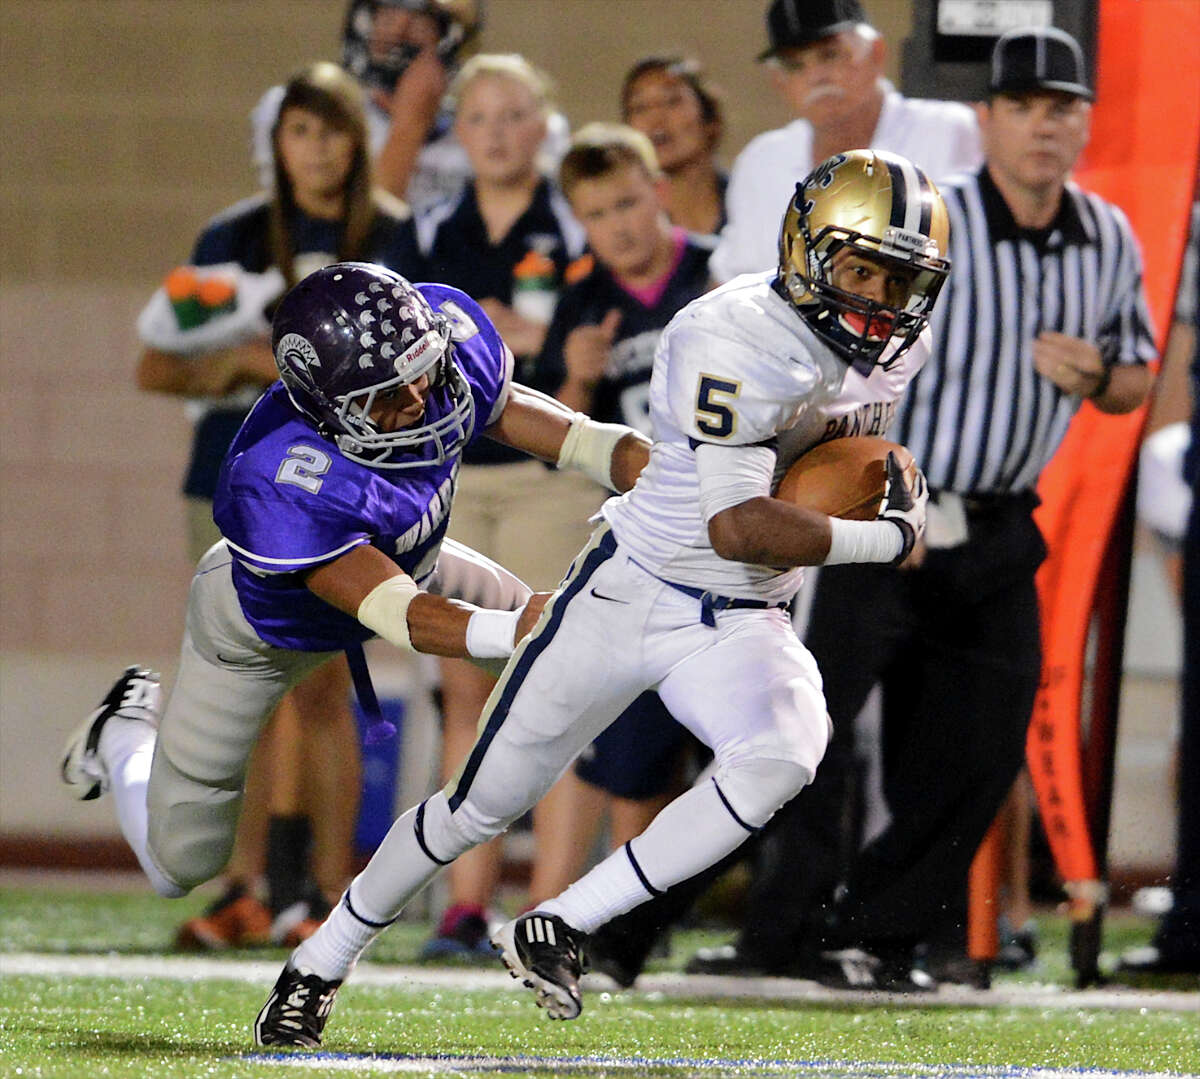 O'Connor's Tre Johnson (5) sprints past Warren's Demonte Butler (2) during a district football game between the Warren Warriors and the o'Connor Panthers at Farris Stadium in San Antonio, Saturday, October 19, 2012. John Albright / Special to the Express-News.